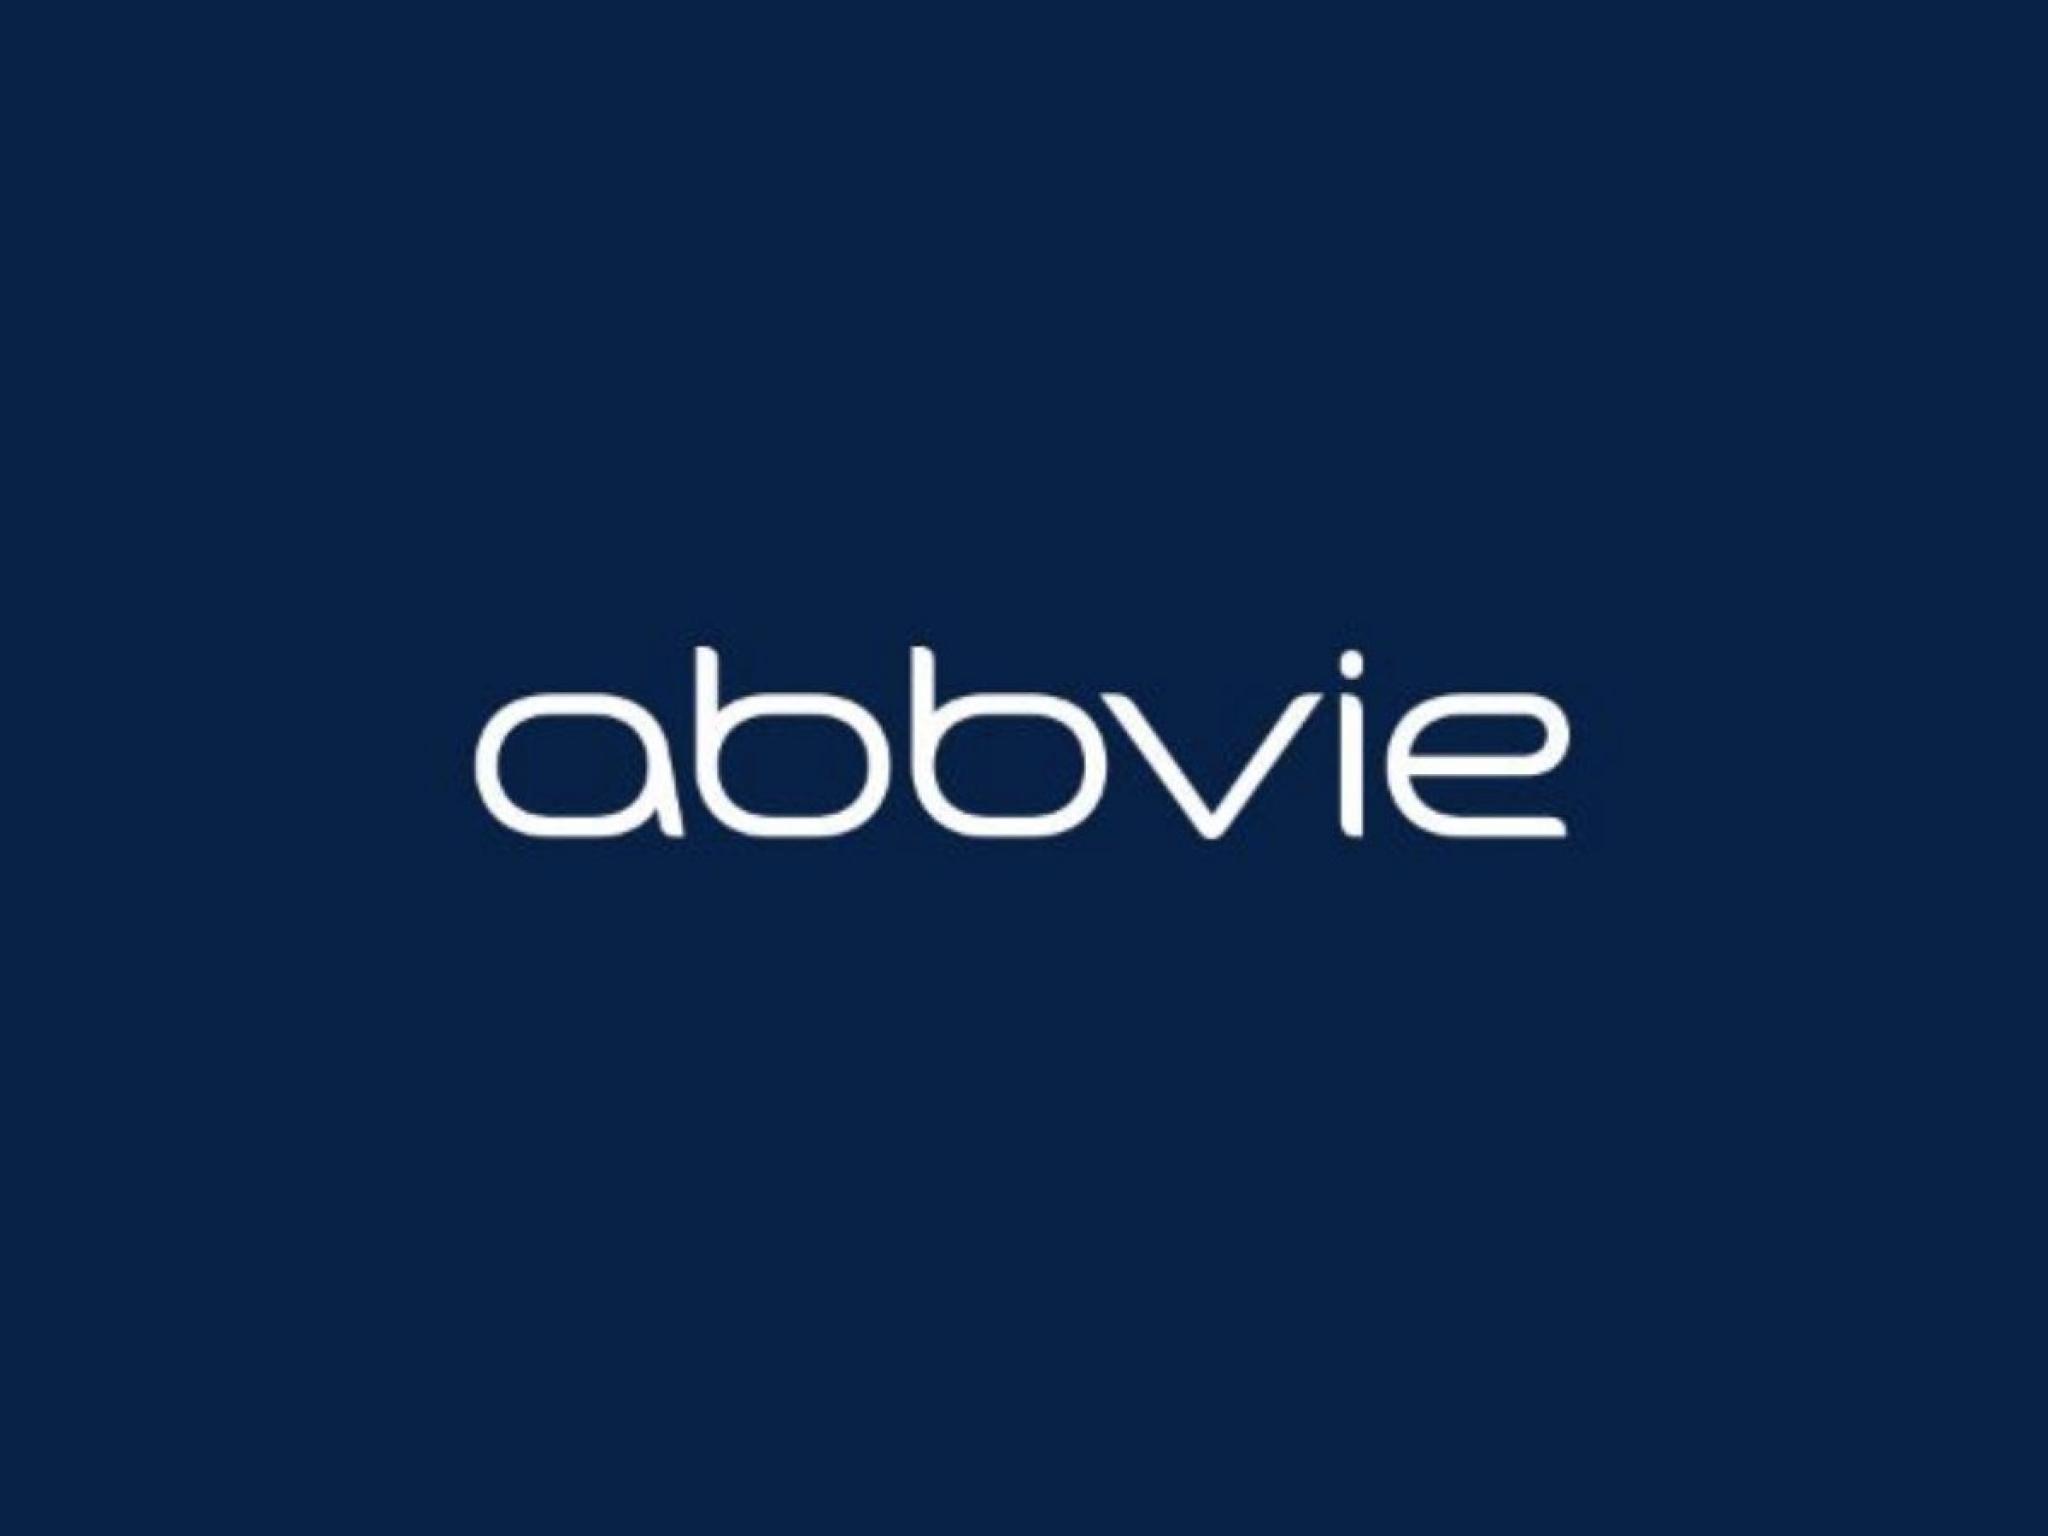  abbvie-to-rally-over-22-here-are-10-top-analyst-forecasts-for-monday 